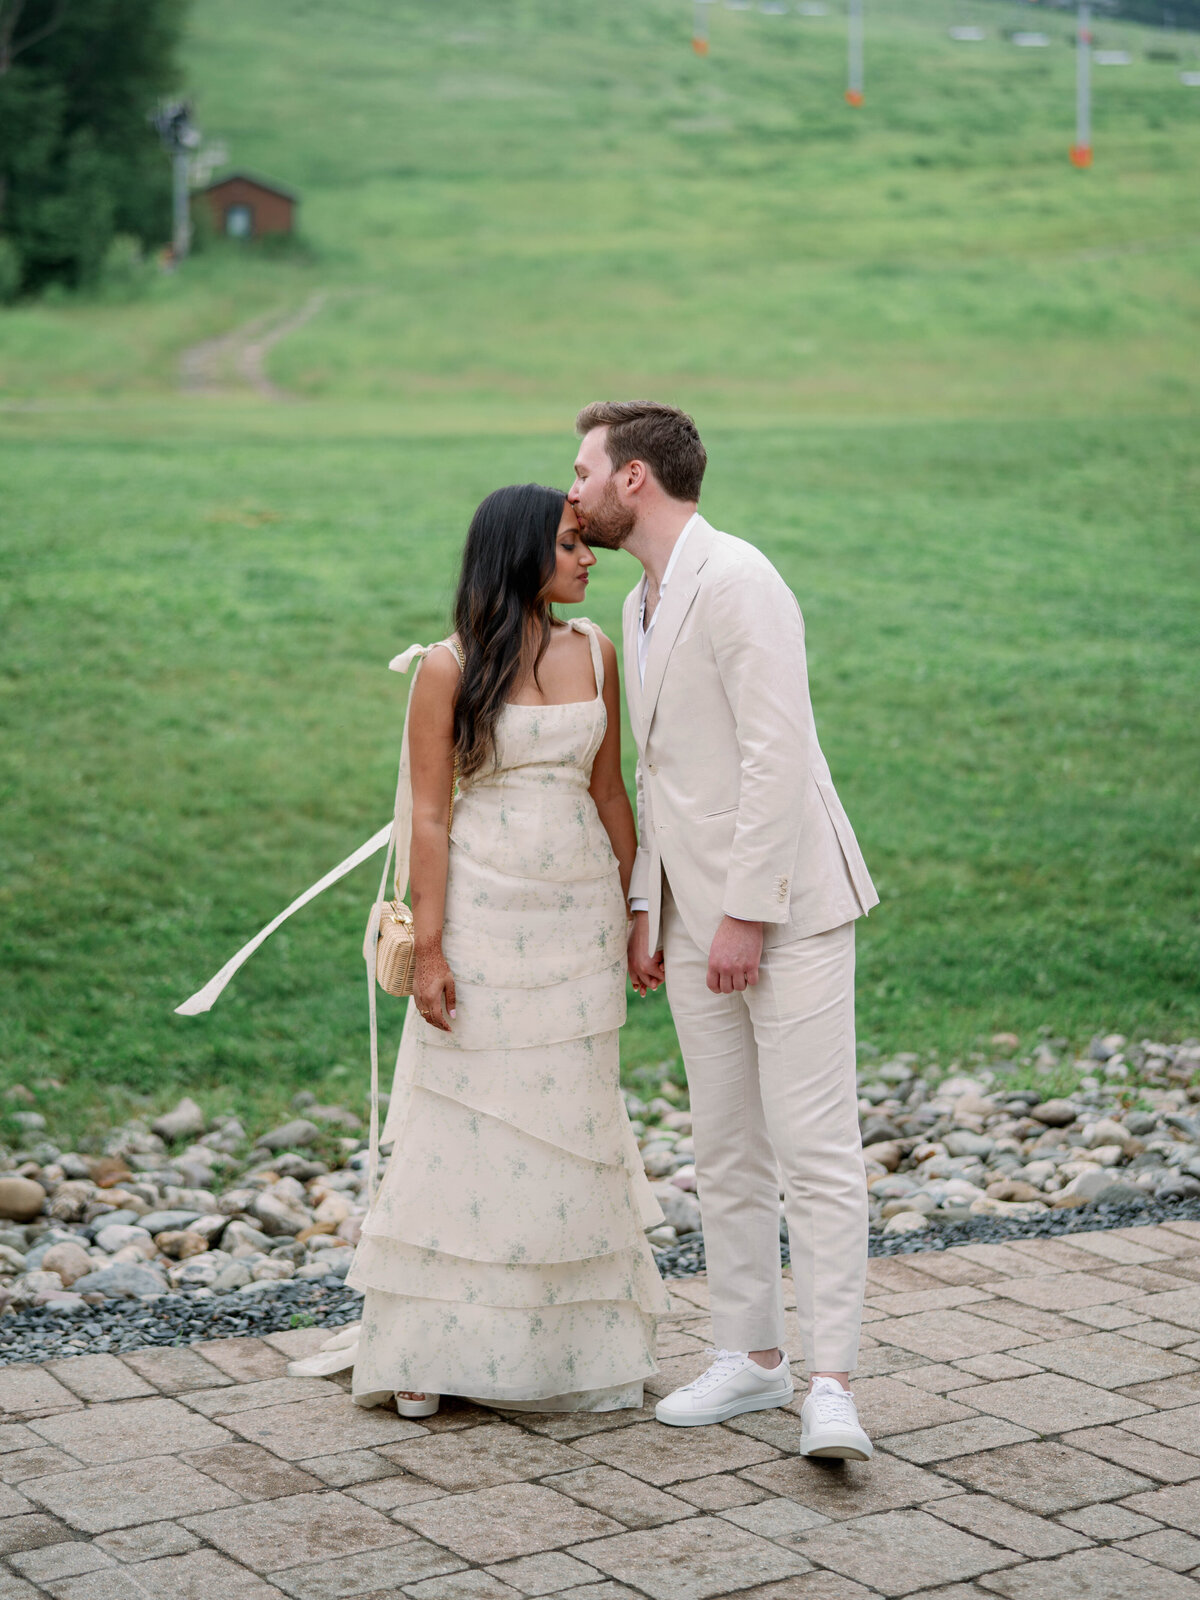 Liz Andolina Photography Destination Wedding Photographer in Italy, New York, Across the East Coast Editorial, heritage-quality images for stylish couples-904